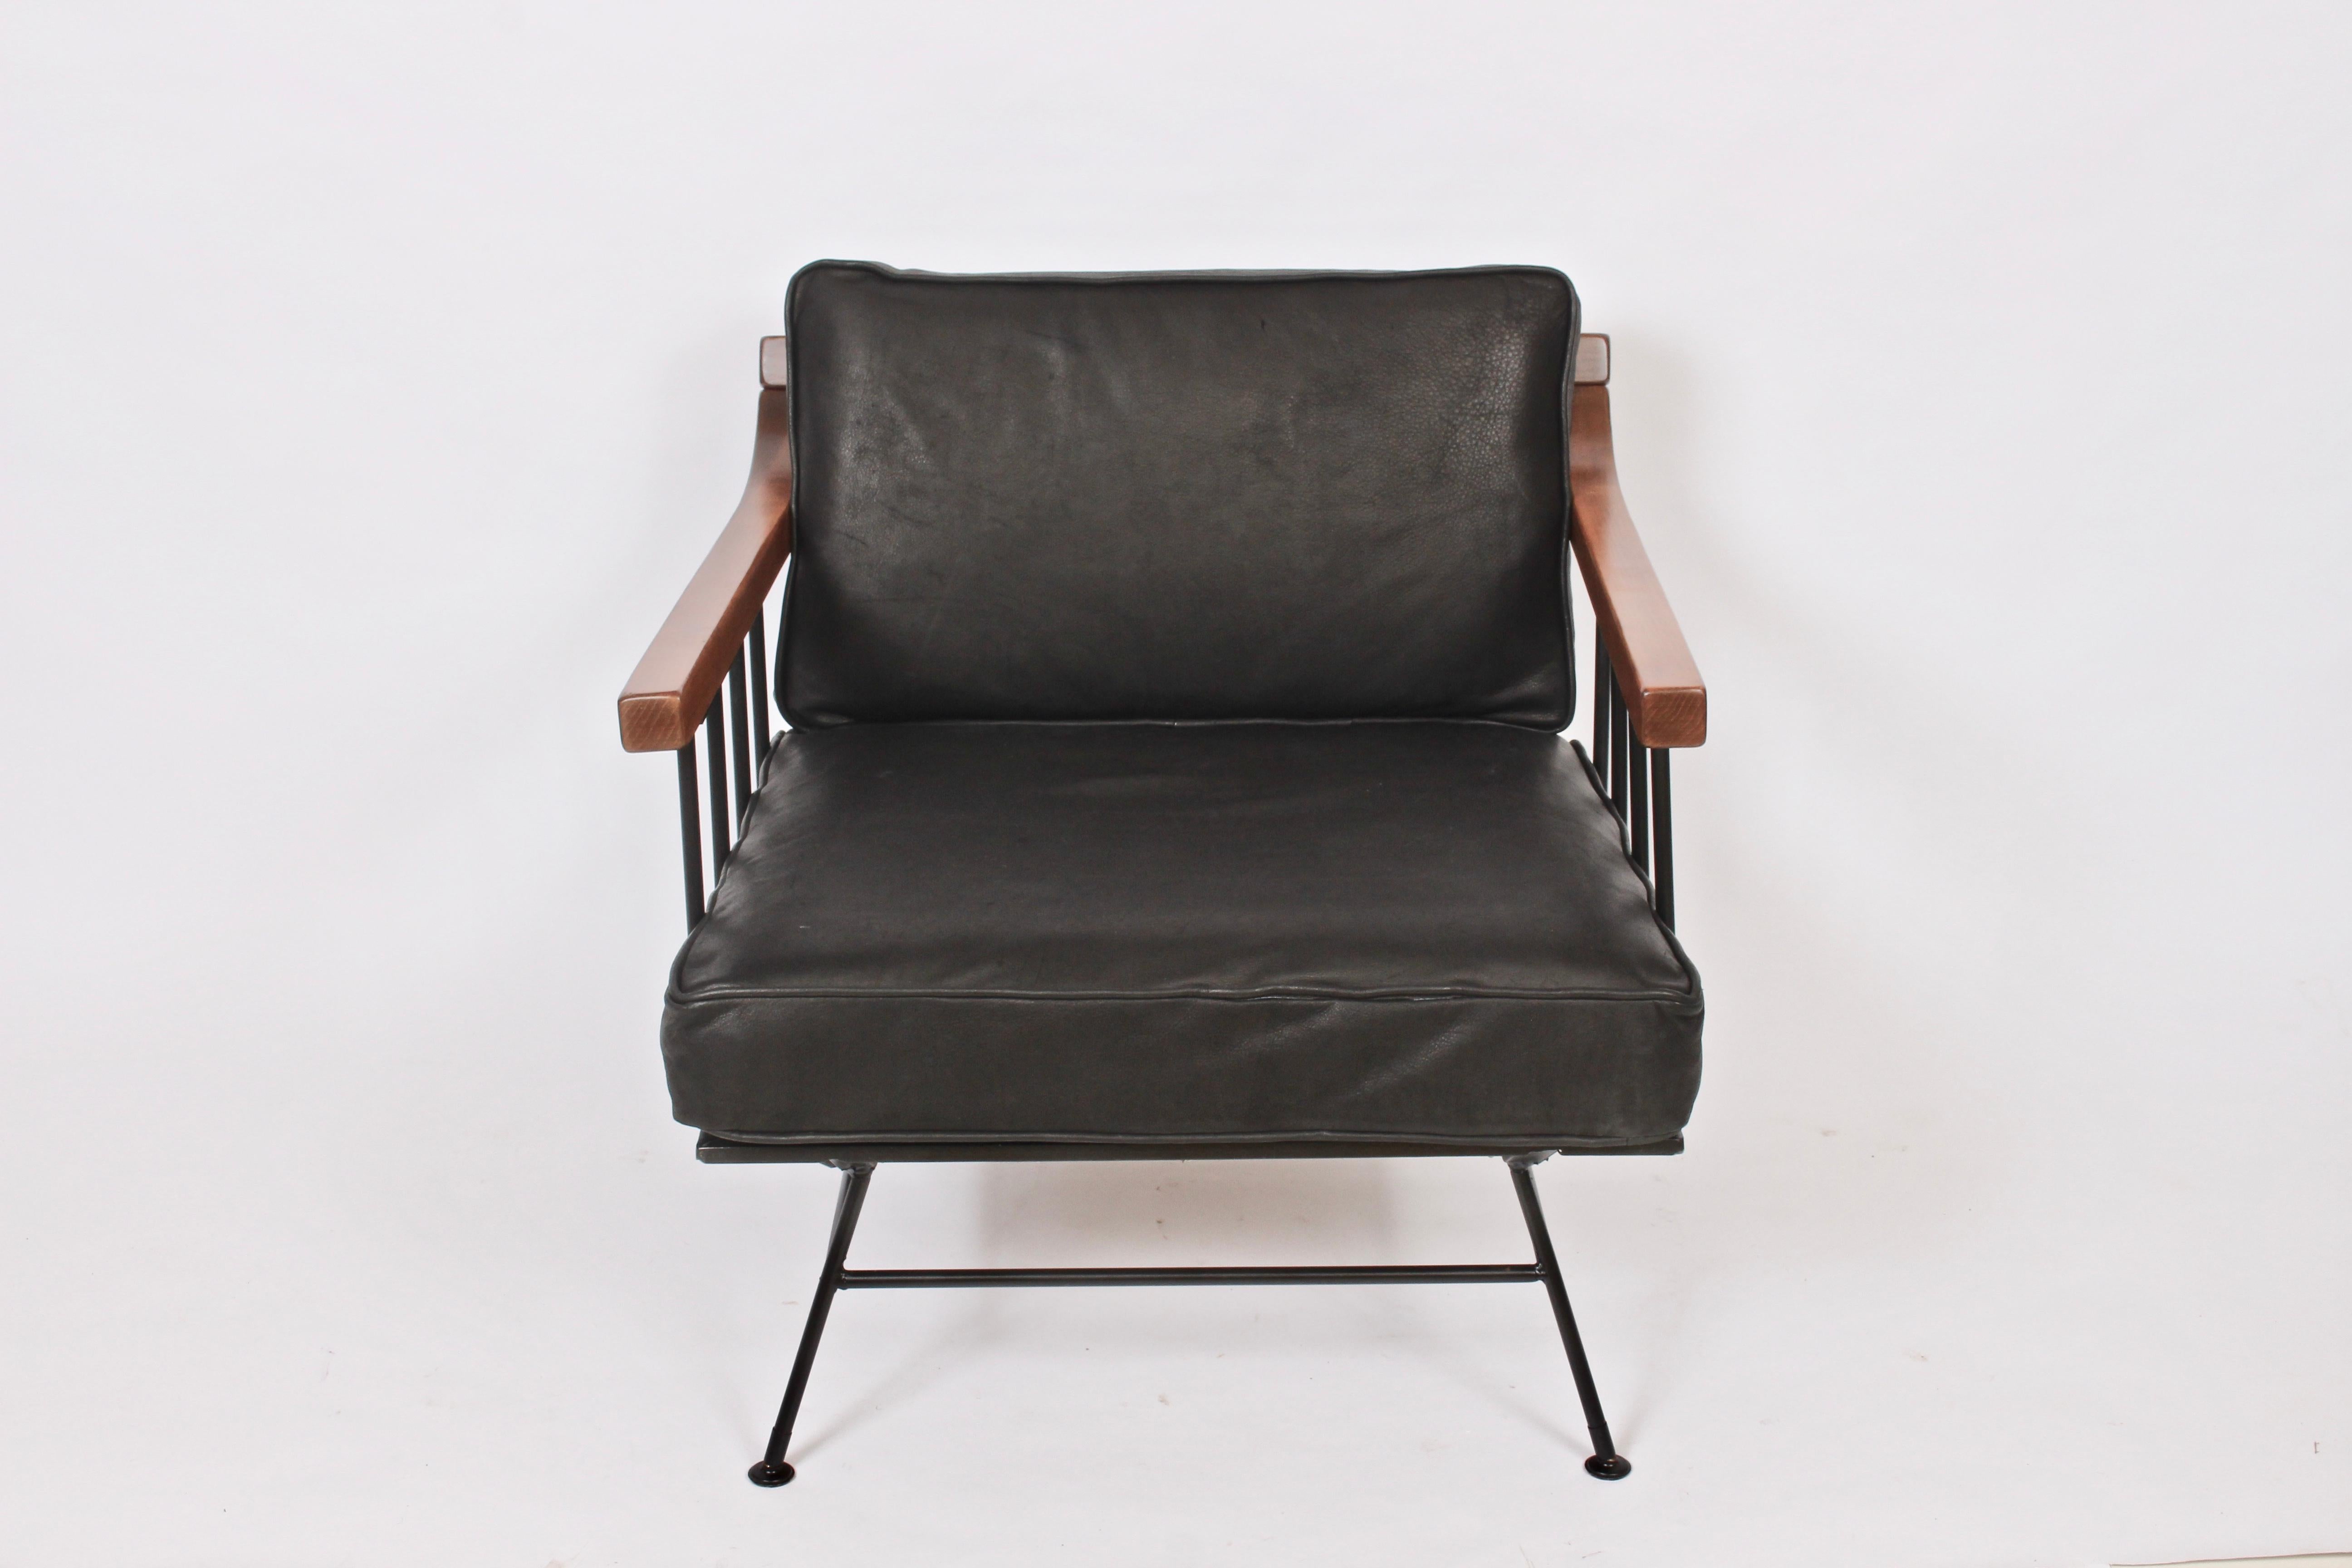 Richard McCarthy for Selrite lounge arm chair, 1950s. Featuring a Wrought Iron and Elm framework, contoured Elm armrests, newly upholstered distressed Black Leather removable and reversible cushions, spring and burlap center support, splayed Iron